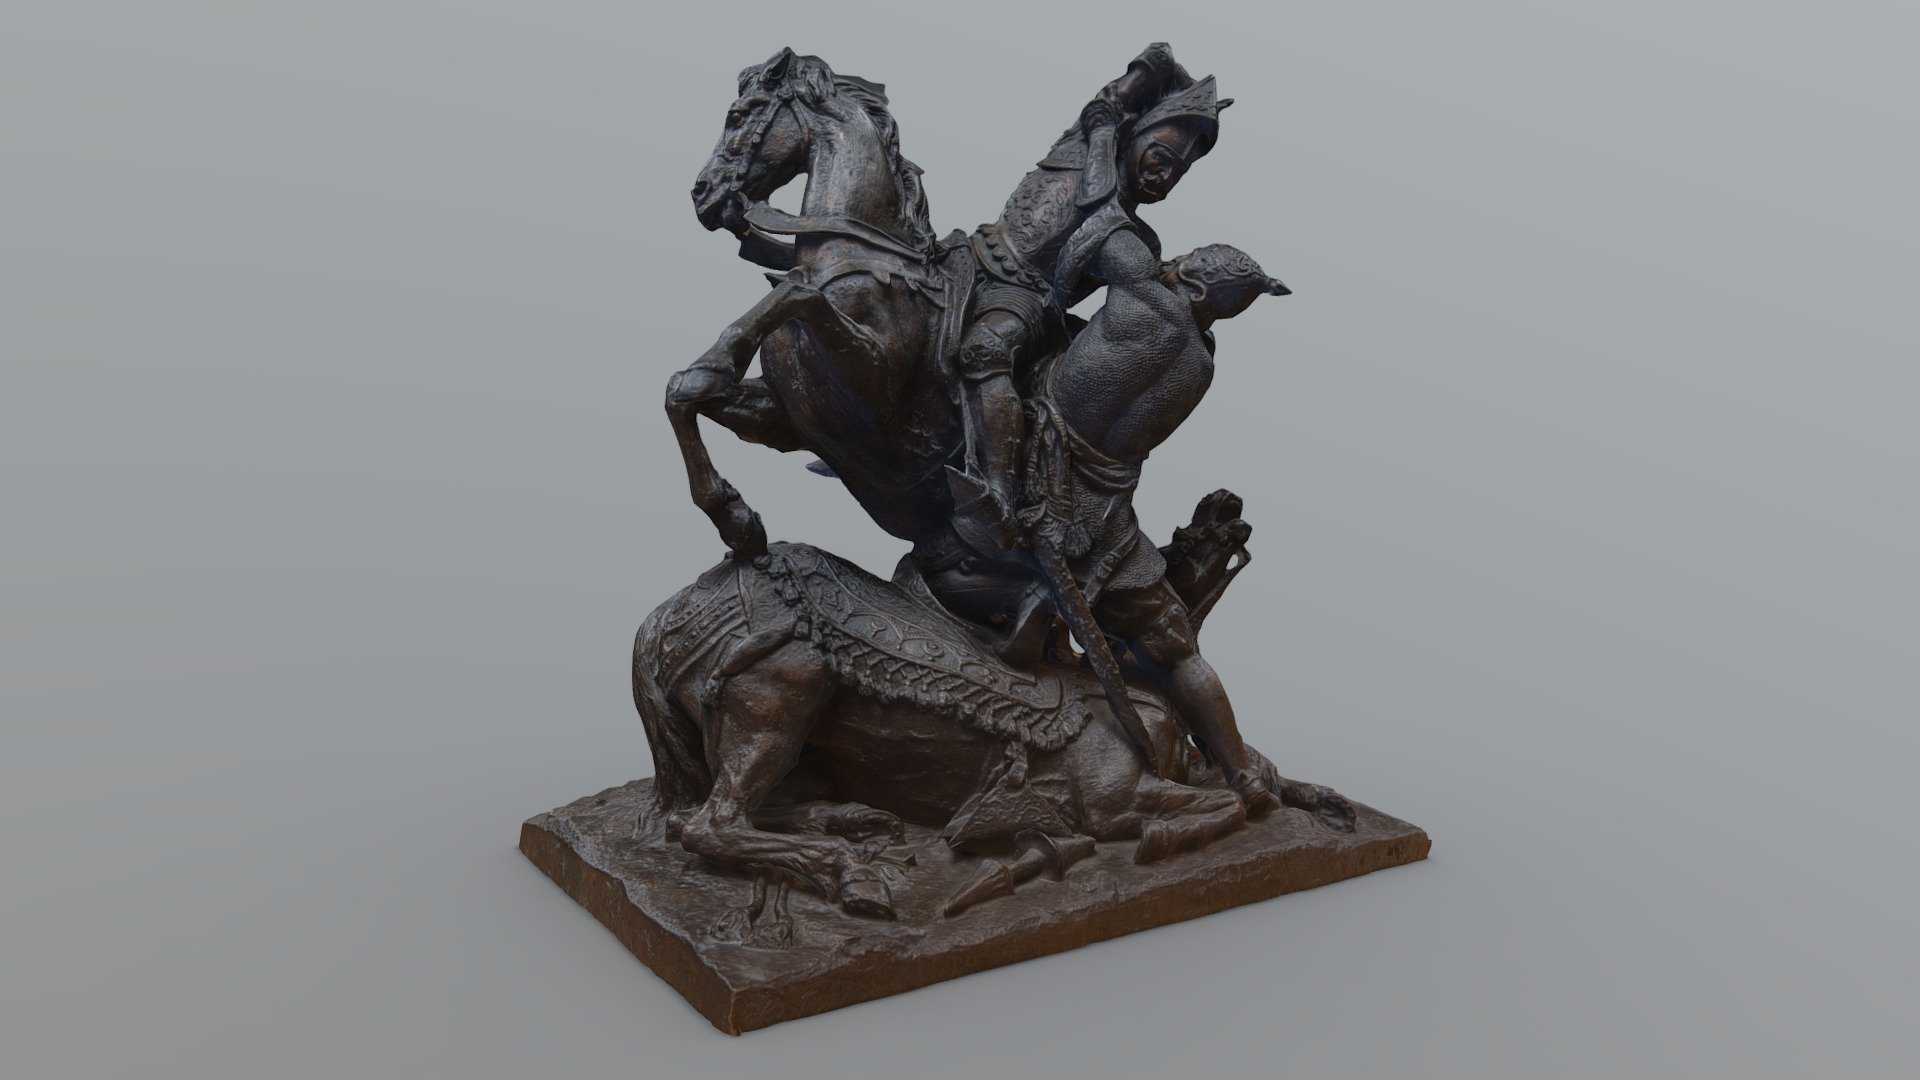 This evocative bronze sculpture, displayed in the Louvre, captures the significant Battle of Tours, fought in 732 AD between Charles Martel, the Frankish leader, and Abd al-Rahman, the Umayyad caliphate governor.

4K textures (diffuse and normal) 3d model